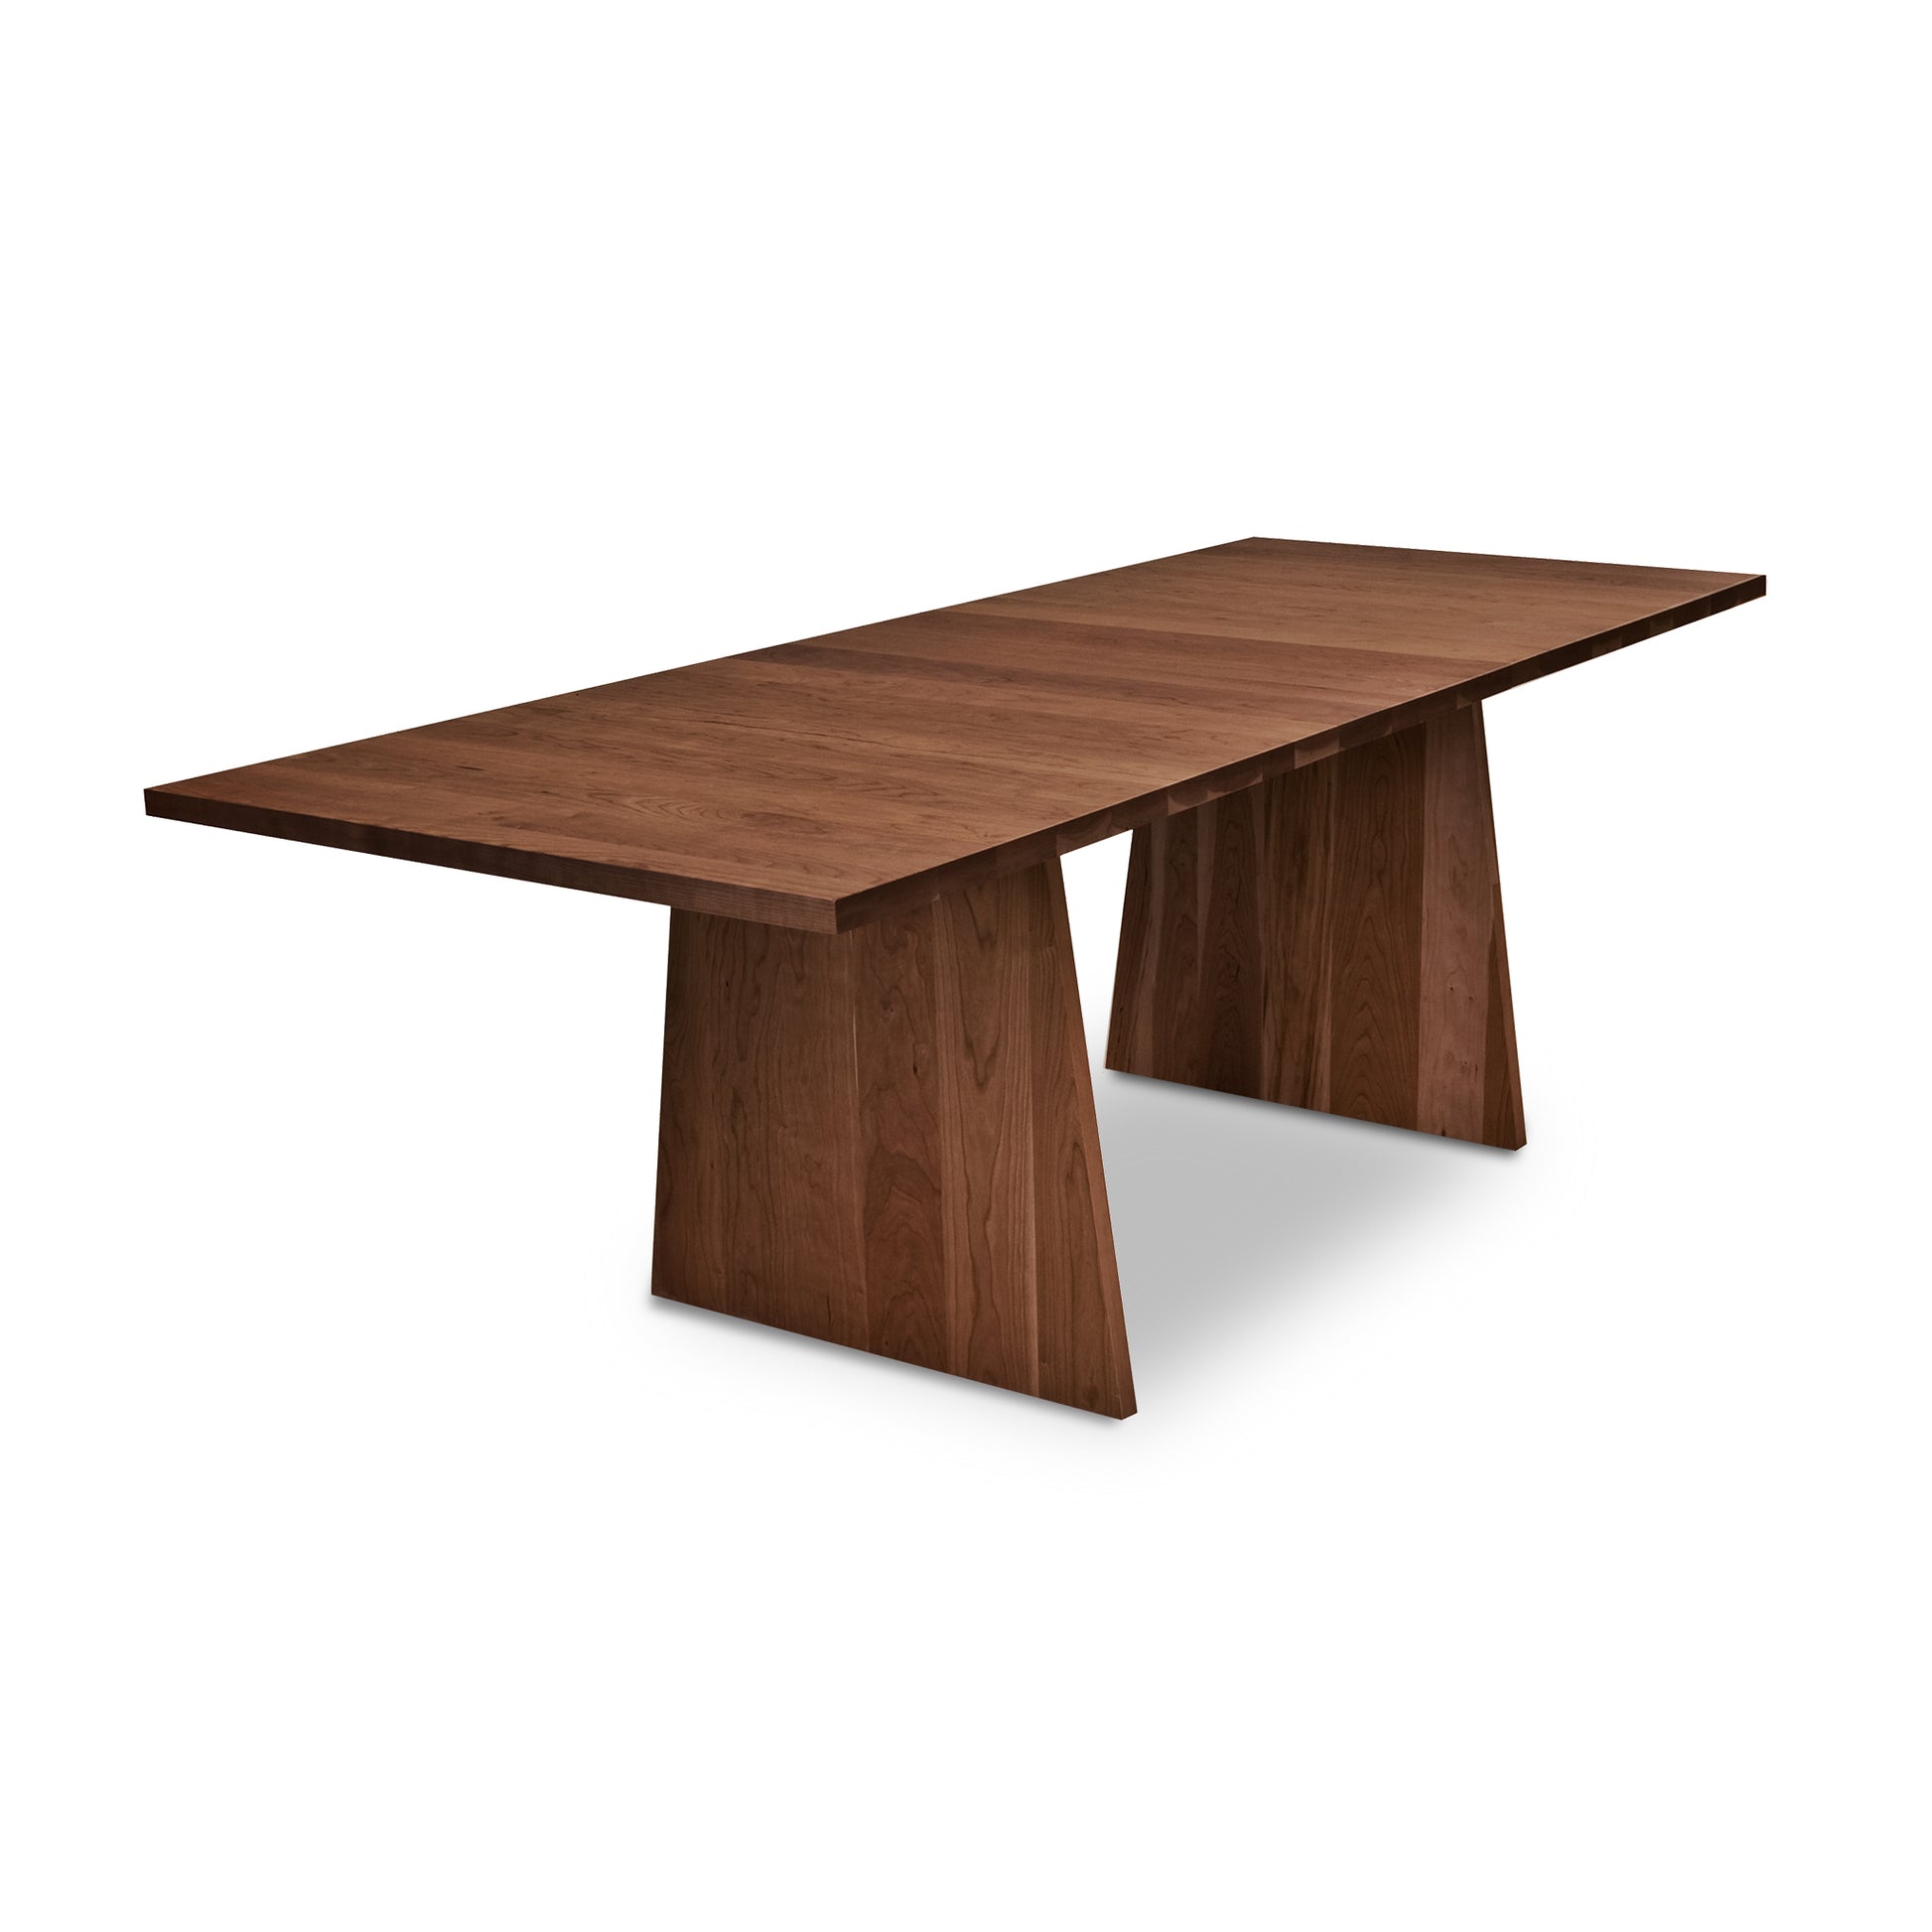 A Lyndon Furniture modern designer extension table with a rectangular base.